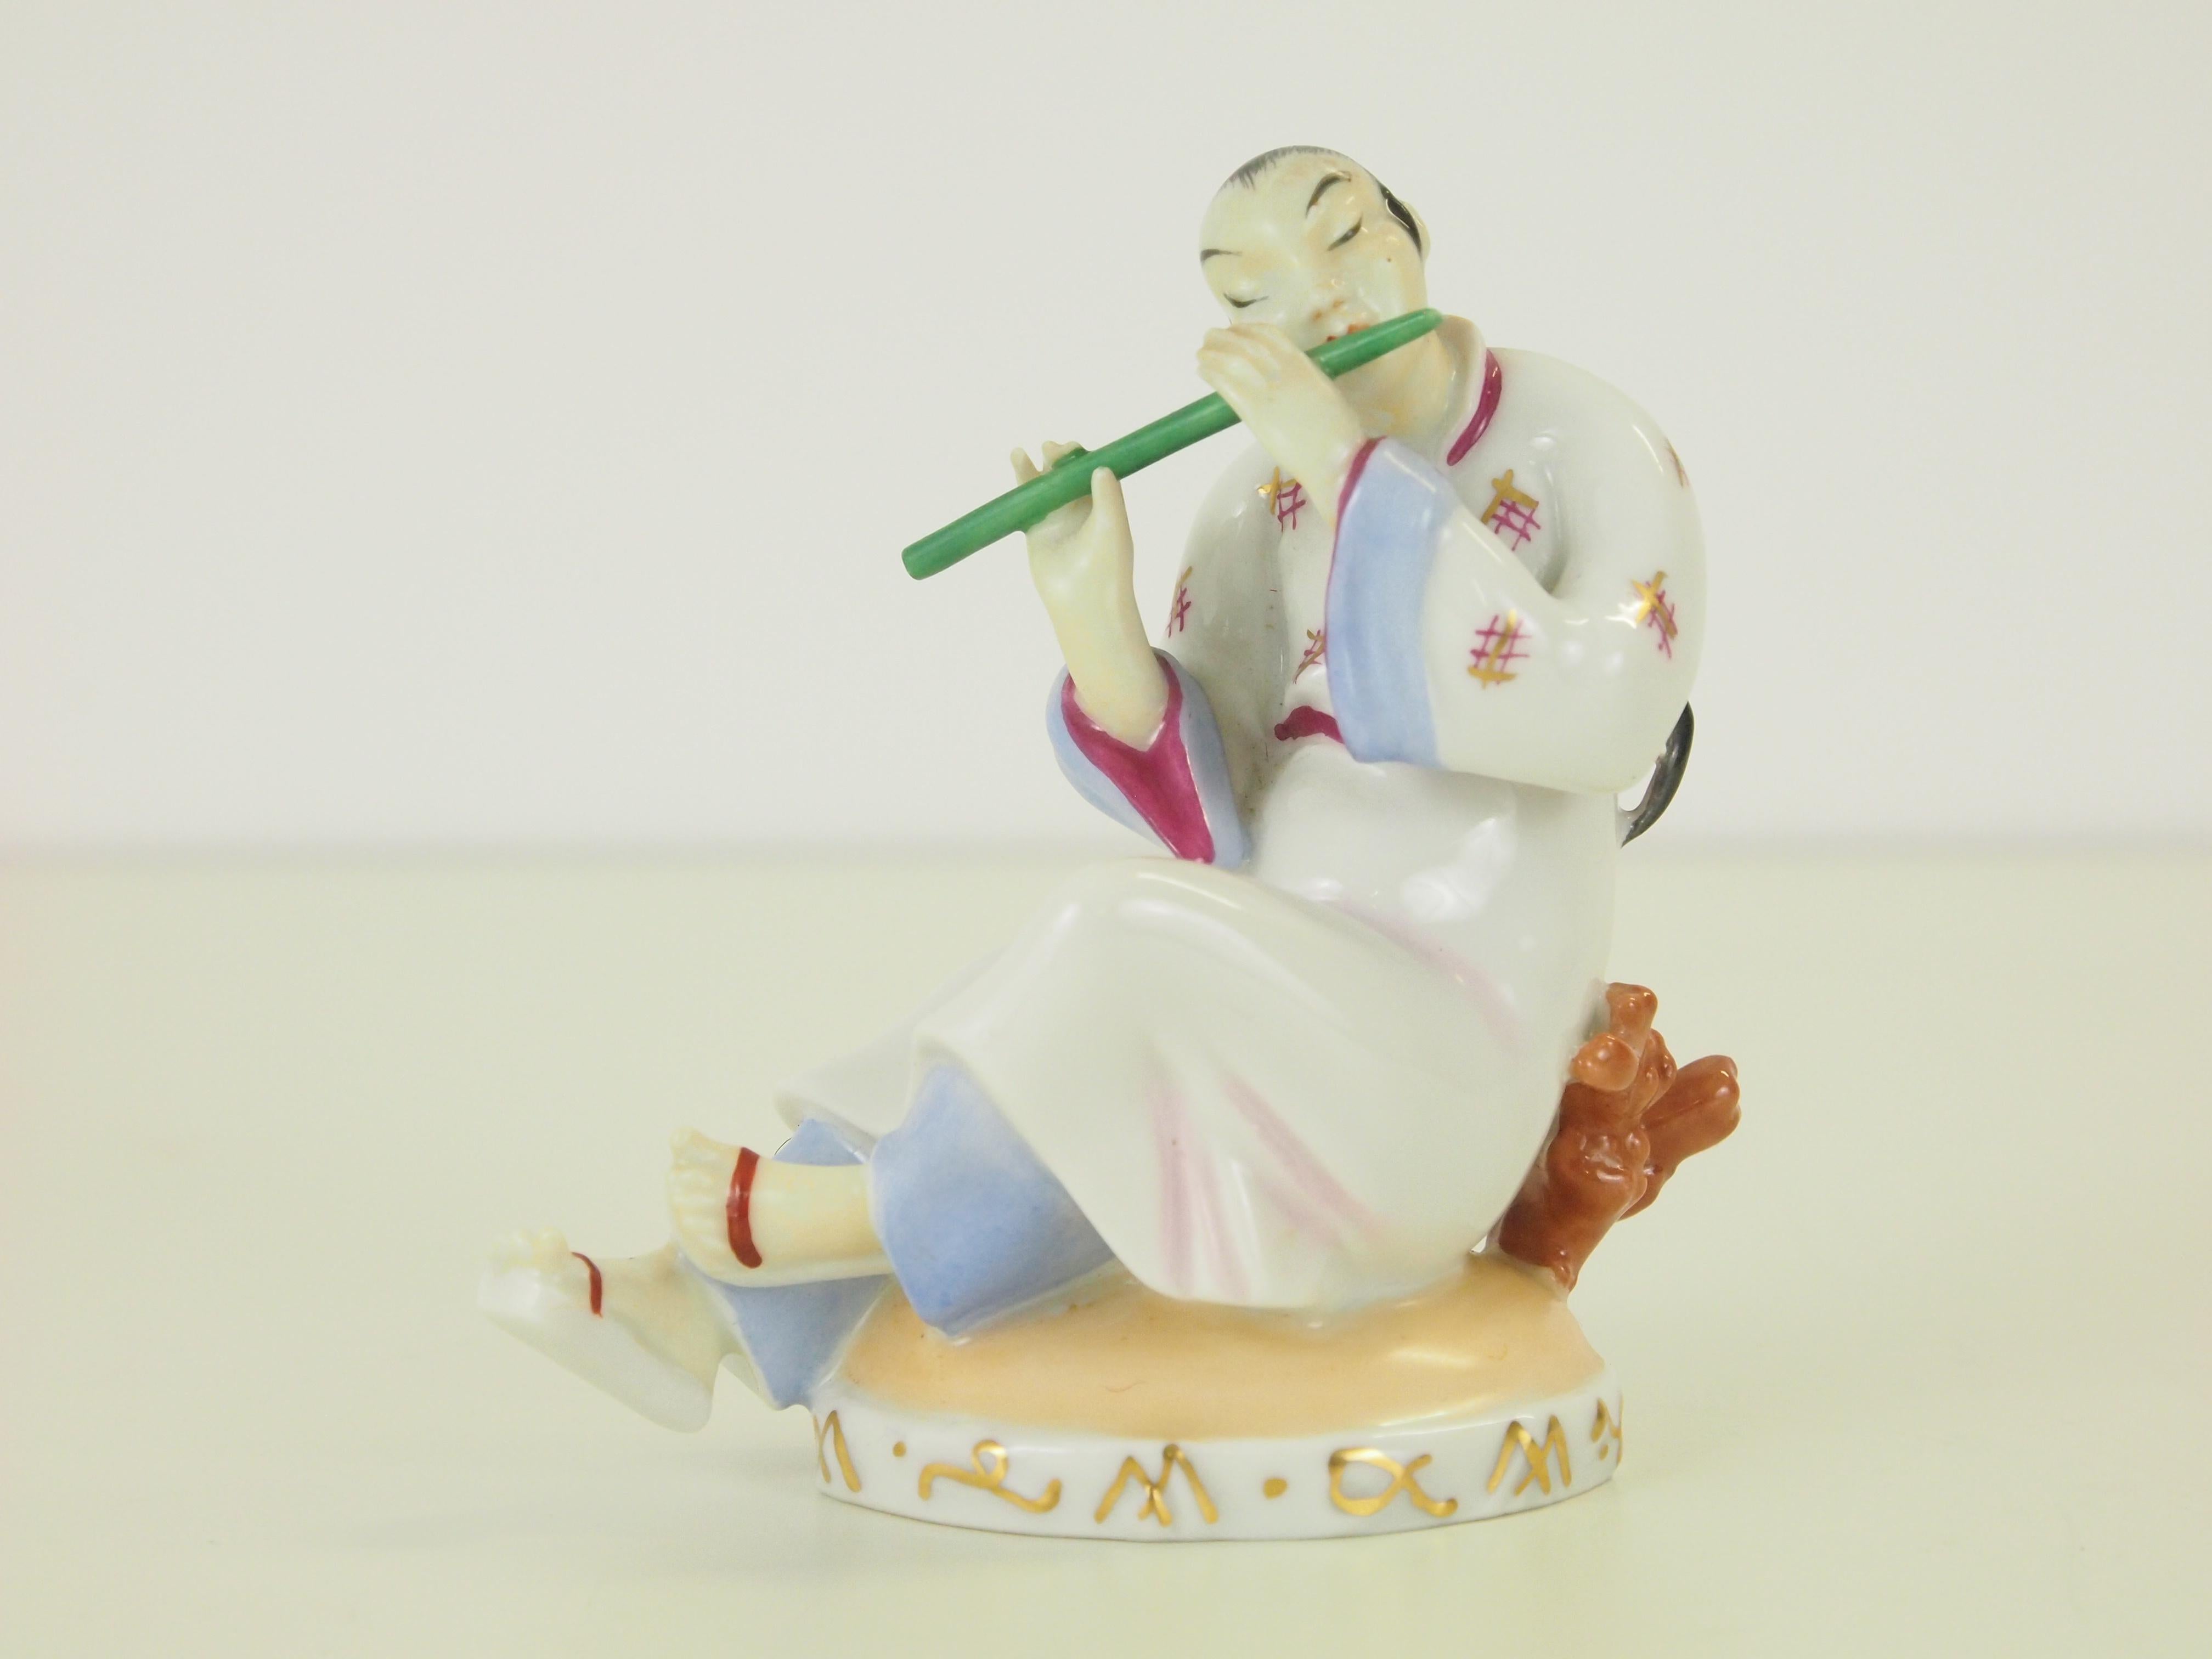 Delicate fine porcelain figurine depicting a Chinese man plating the flute

This figurine was (like the other figurine depicting a Chinese woman) designed in 1926 by Mathilde Szendrö-Jaksch for Augarten Wien (Vienna). It is very well handcrafted